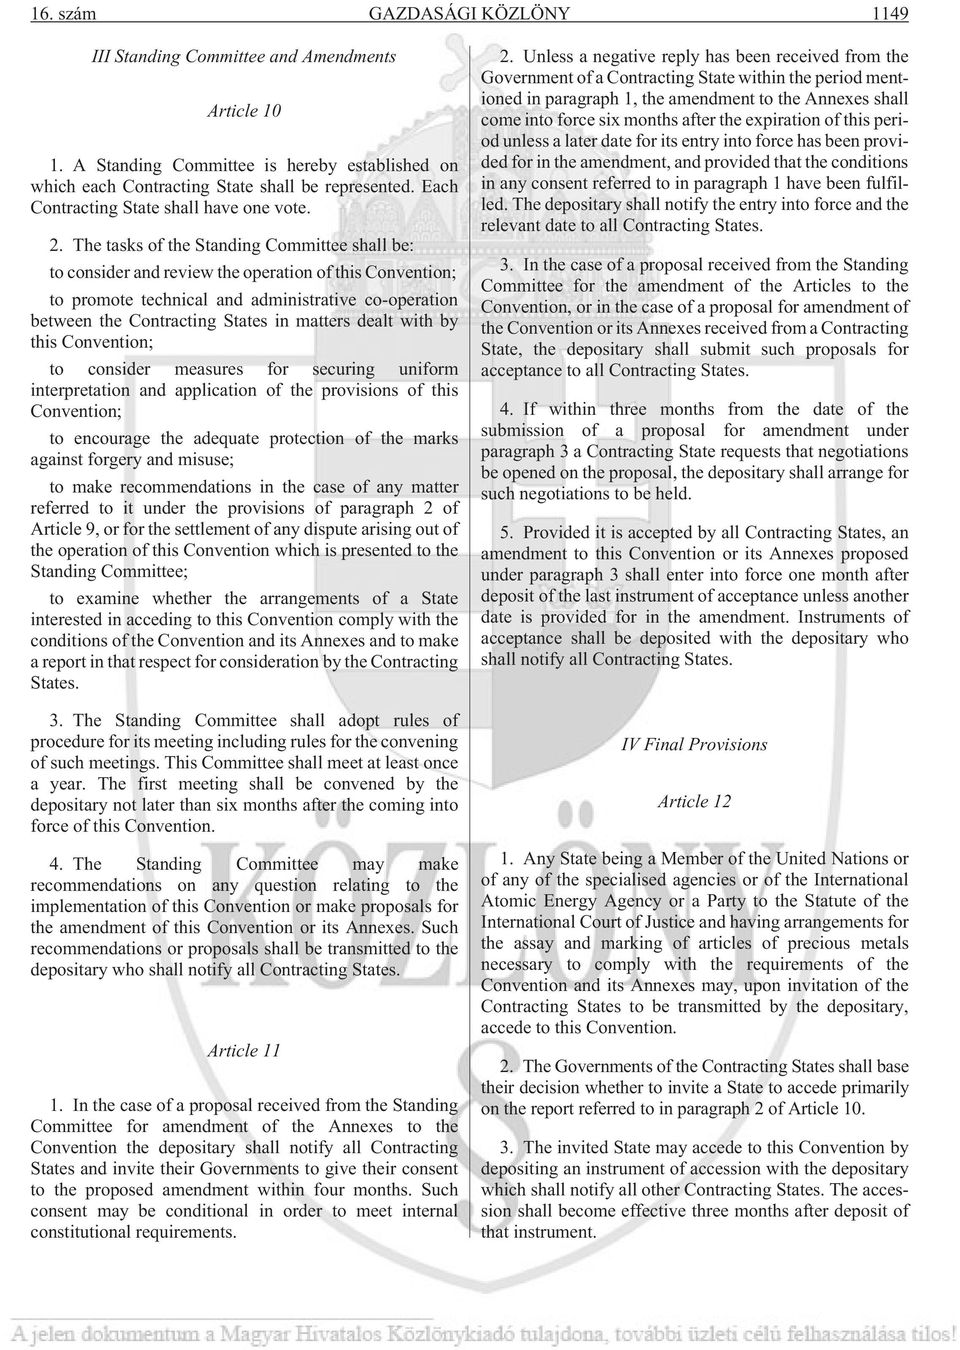 The tasks of the Standing Committee shall be: to consider and review the operation of this Convention; to promote technical and administrative co-operation between the Contracting States in matters